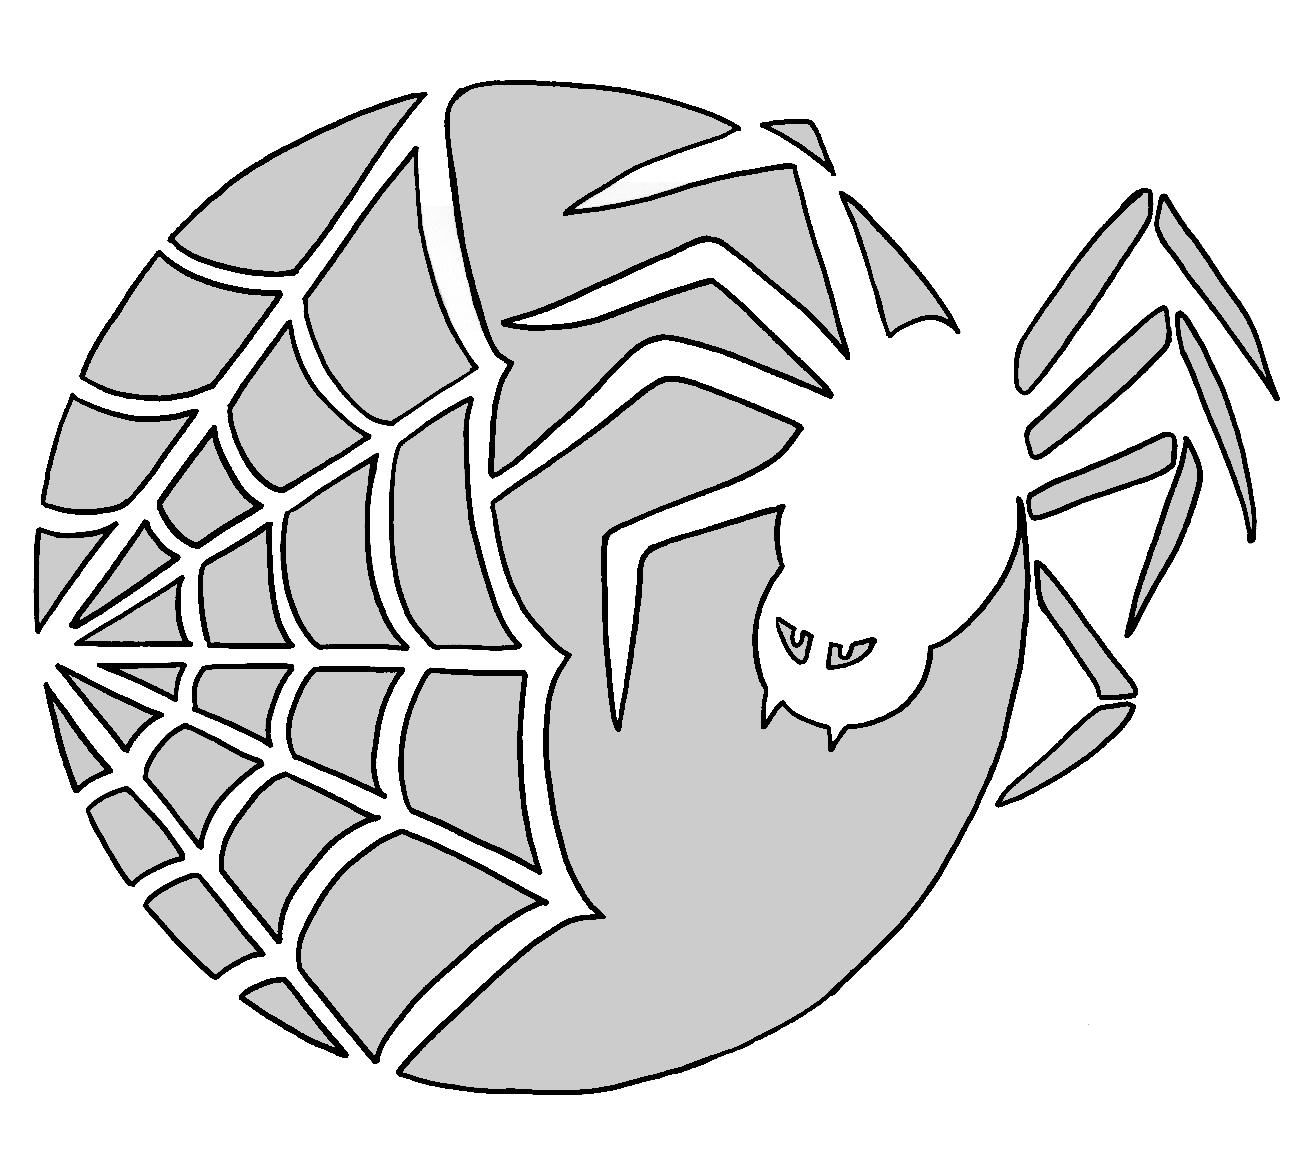 The Spider s Web Pumpkin Carving Templates Halloween Pumpkin Stencils Pumpkin Carvings Stencils